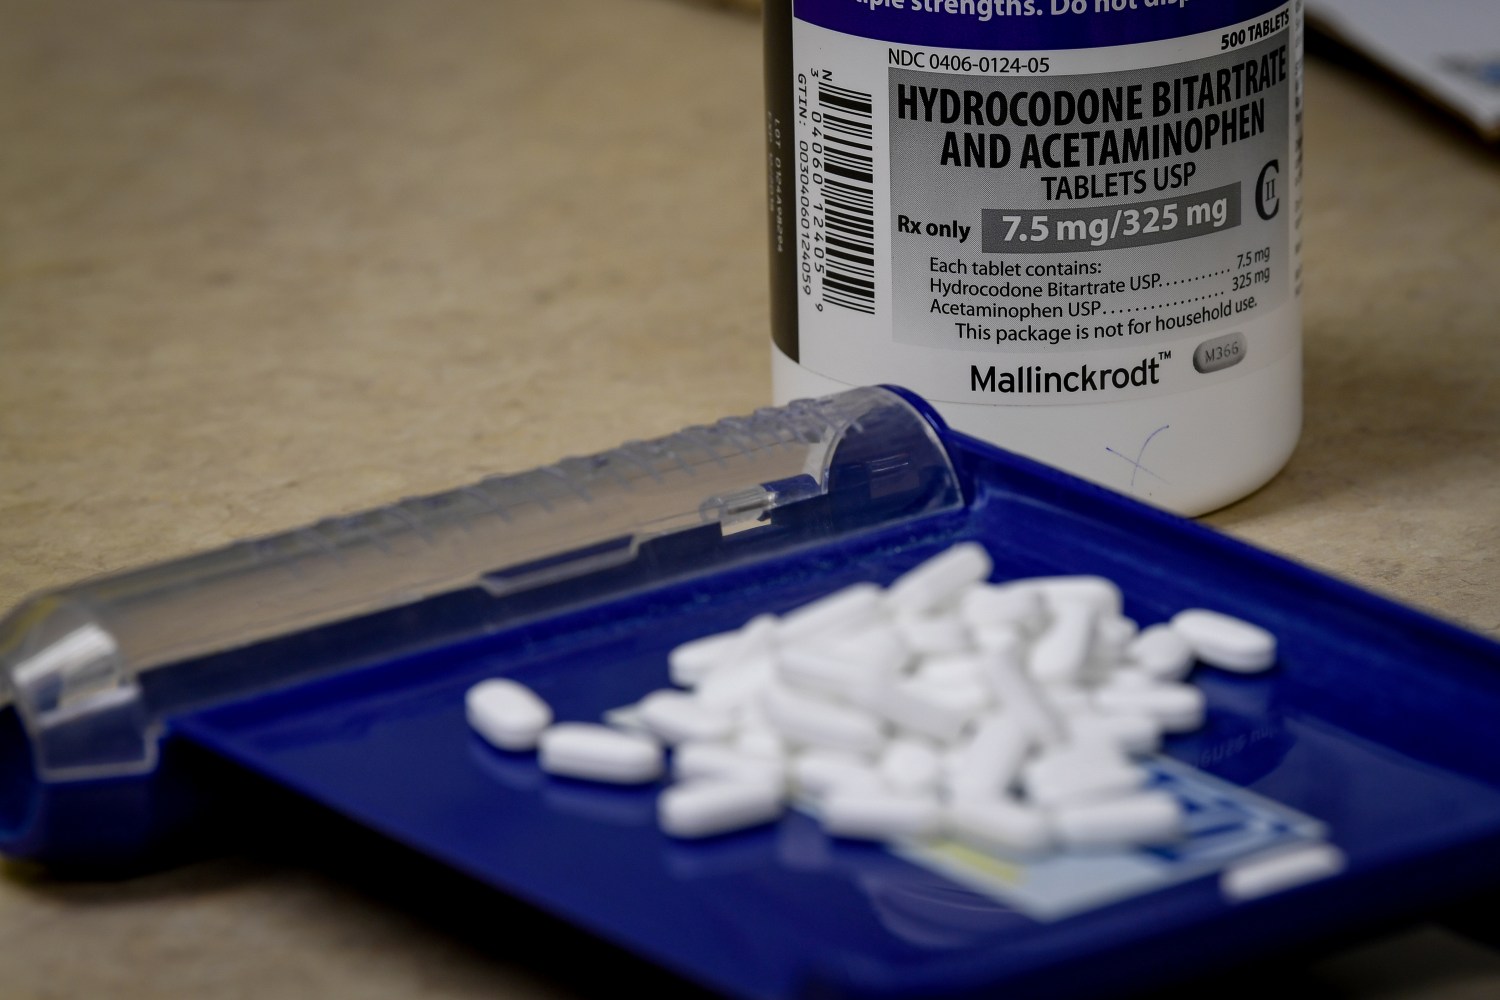 FILE PHOTO - Tablets of Hydrocodone at a pharmacy in Portsmouth, Ohio, U.S. on June 21, 2017. To match Special Report USA-HEALTHCARE/OPIOIDS REUTERS/Bryan Woolston/File Photo - RC1B754C44F0